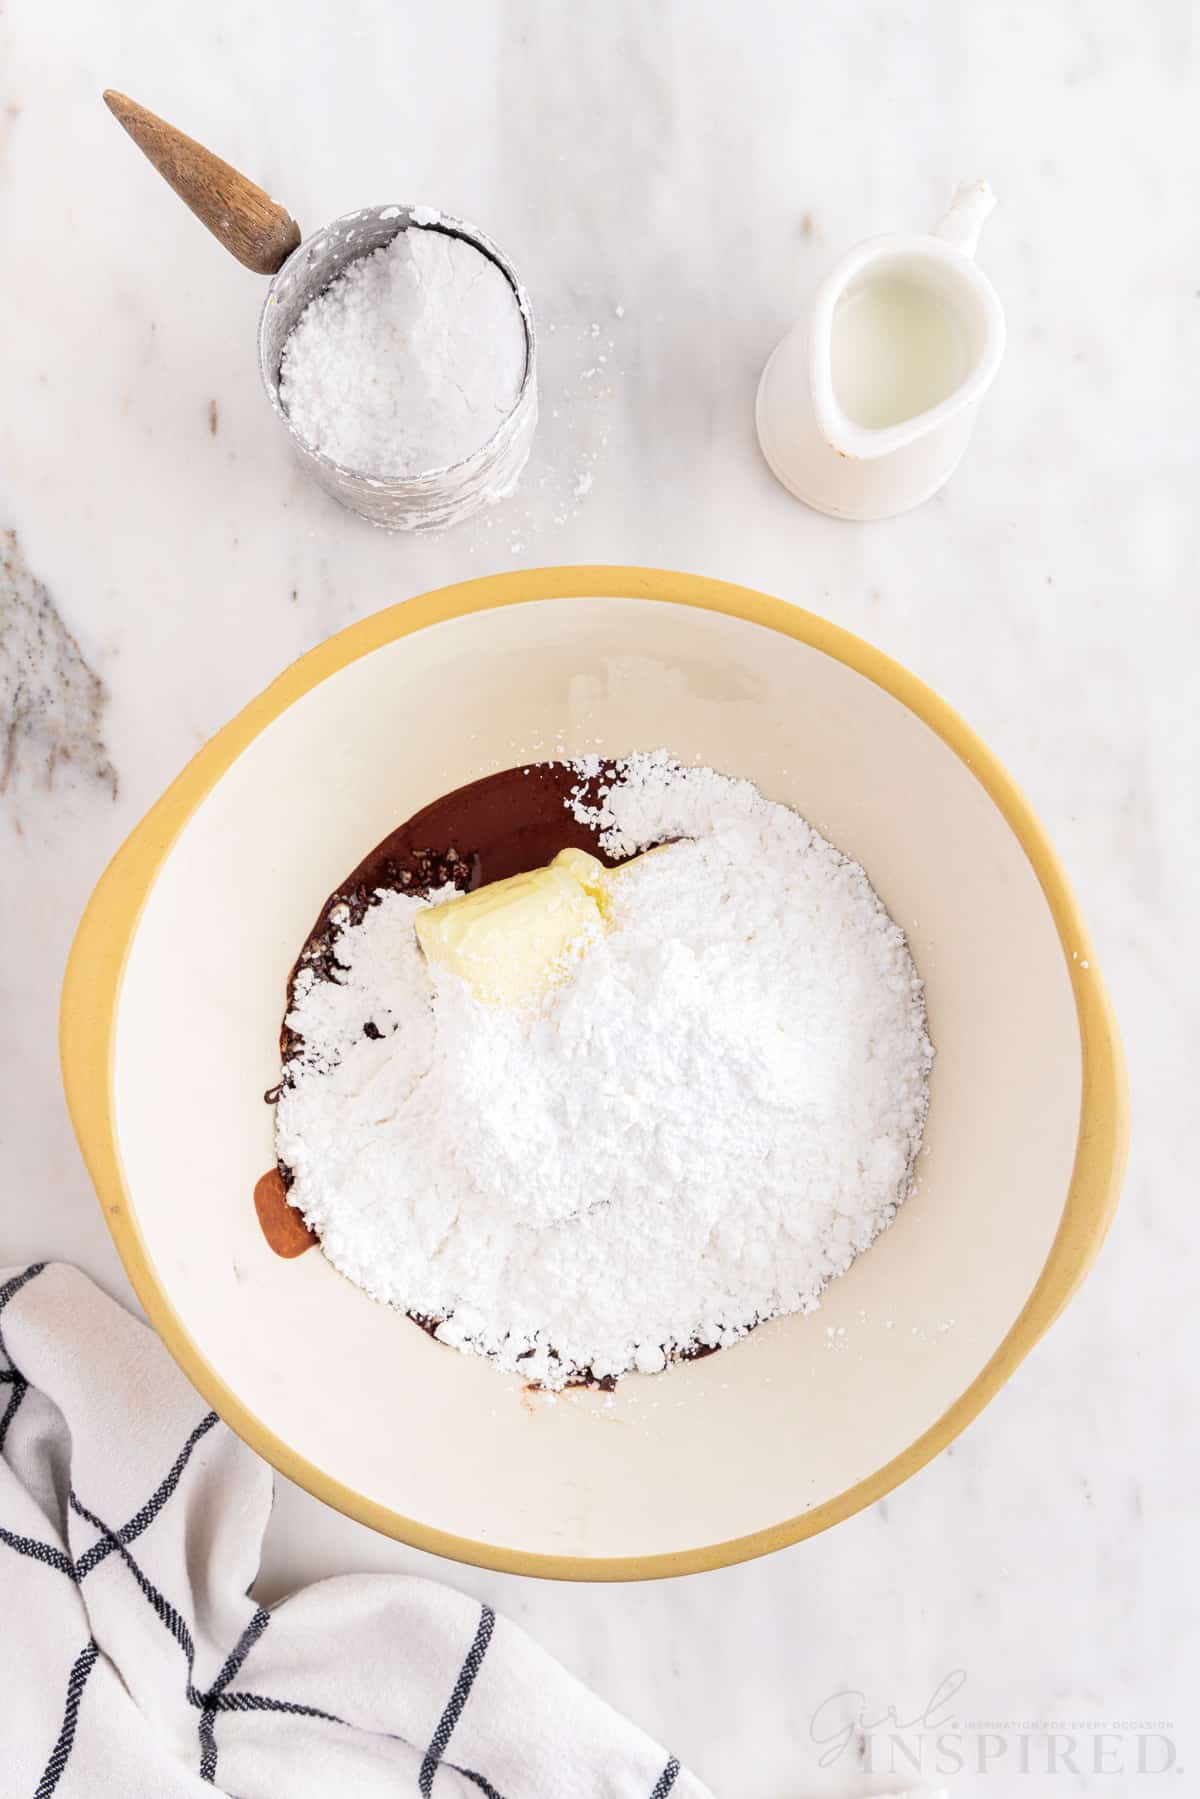 Bowl with powdered sugar, softened butter, and melted chocolate, measuring cup with powdered sugar, small jug of milk, checkered linen, on a marble countertop.